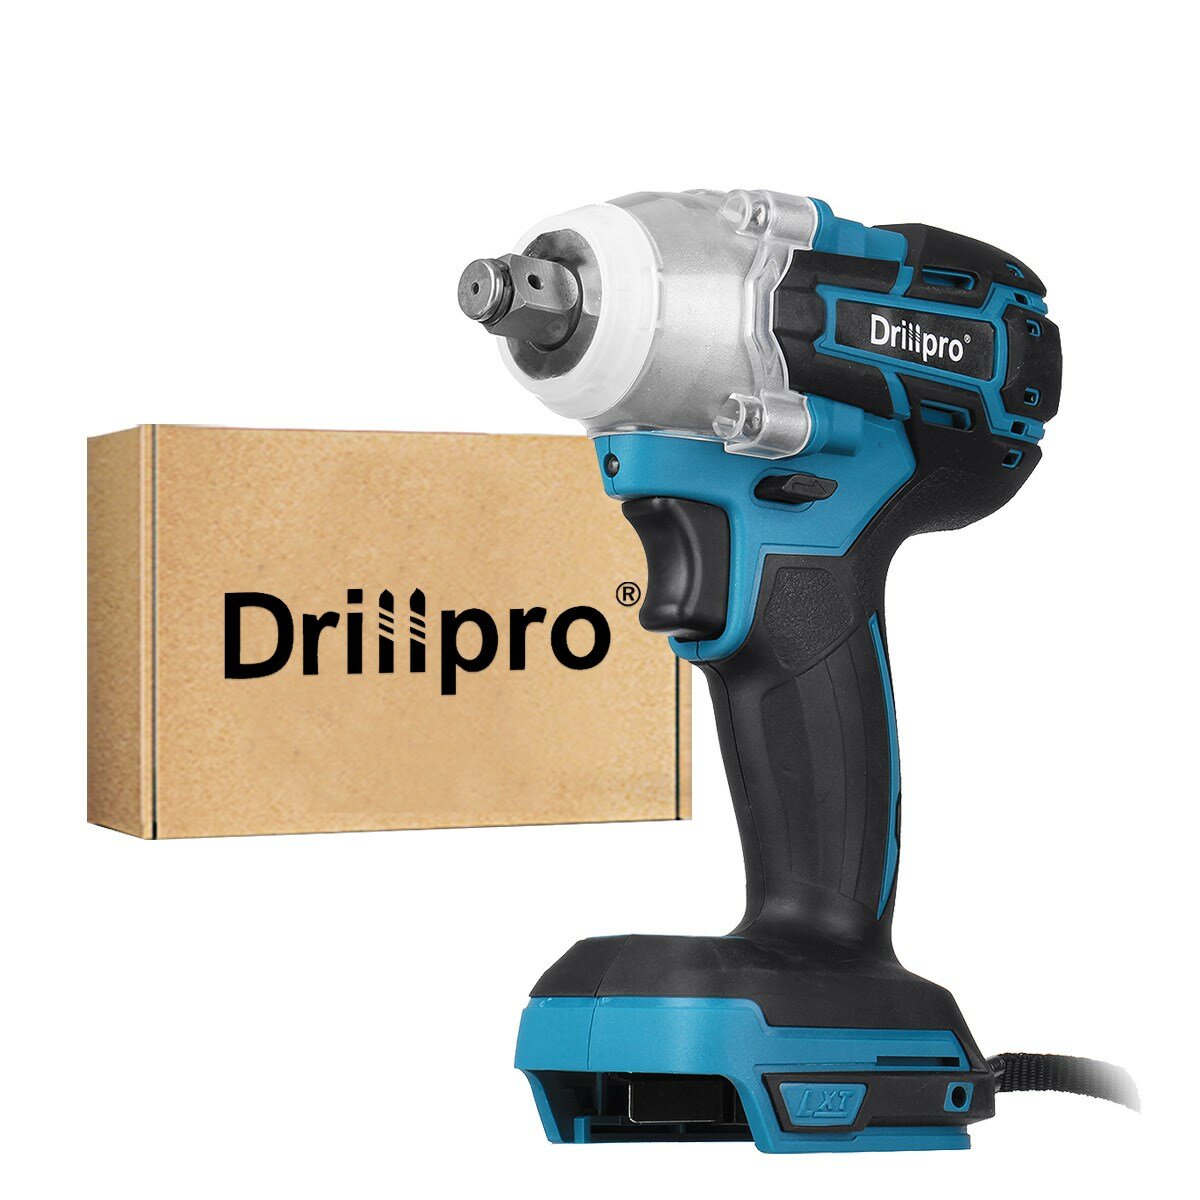 best price,drillpro,18v,3200rpm,impact,wrench,brushless,coupon,price,discount